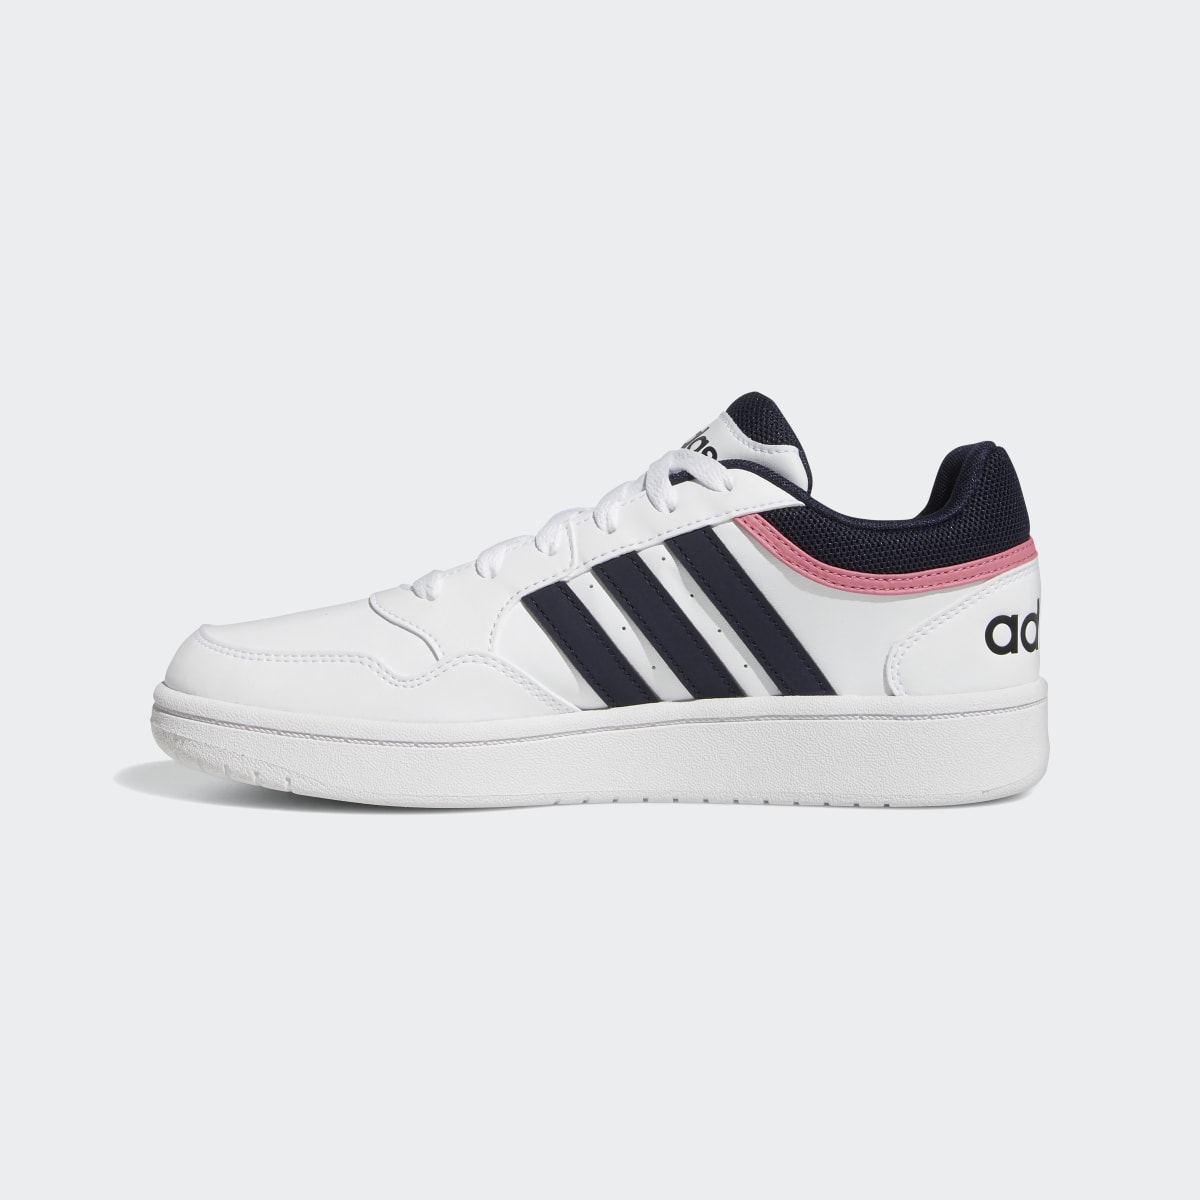 Adidas Hoops 3.0 Low Classic Schuh. 7